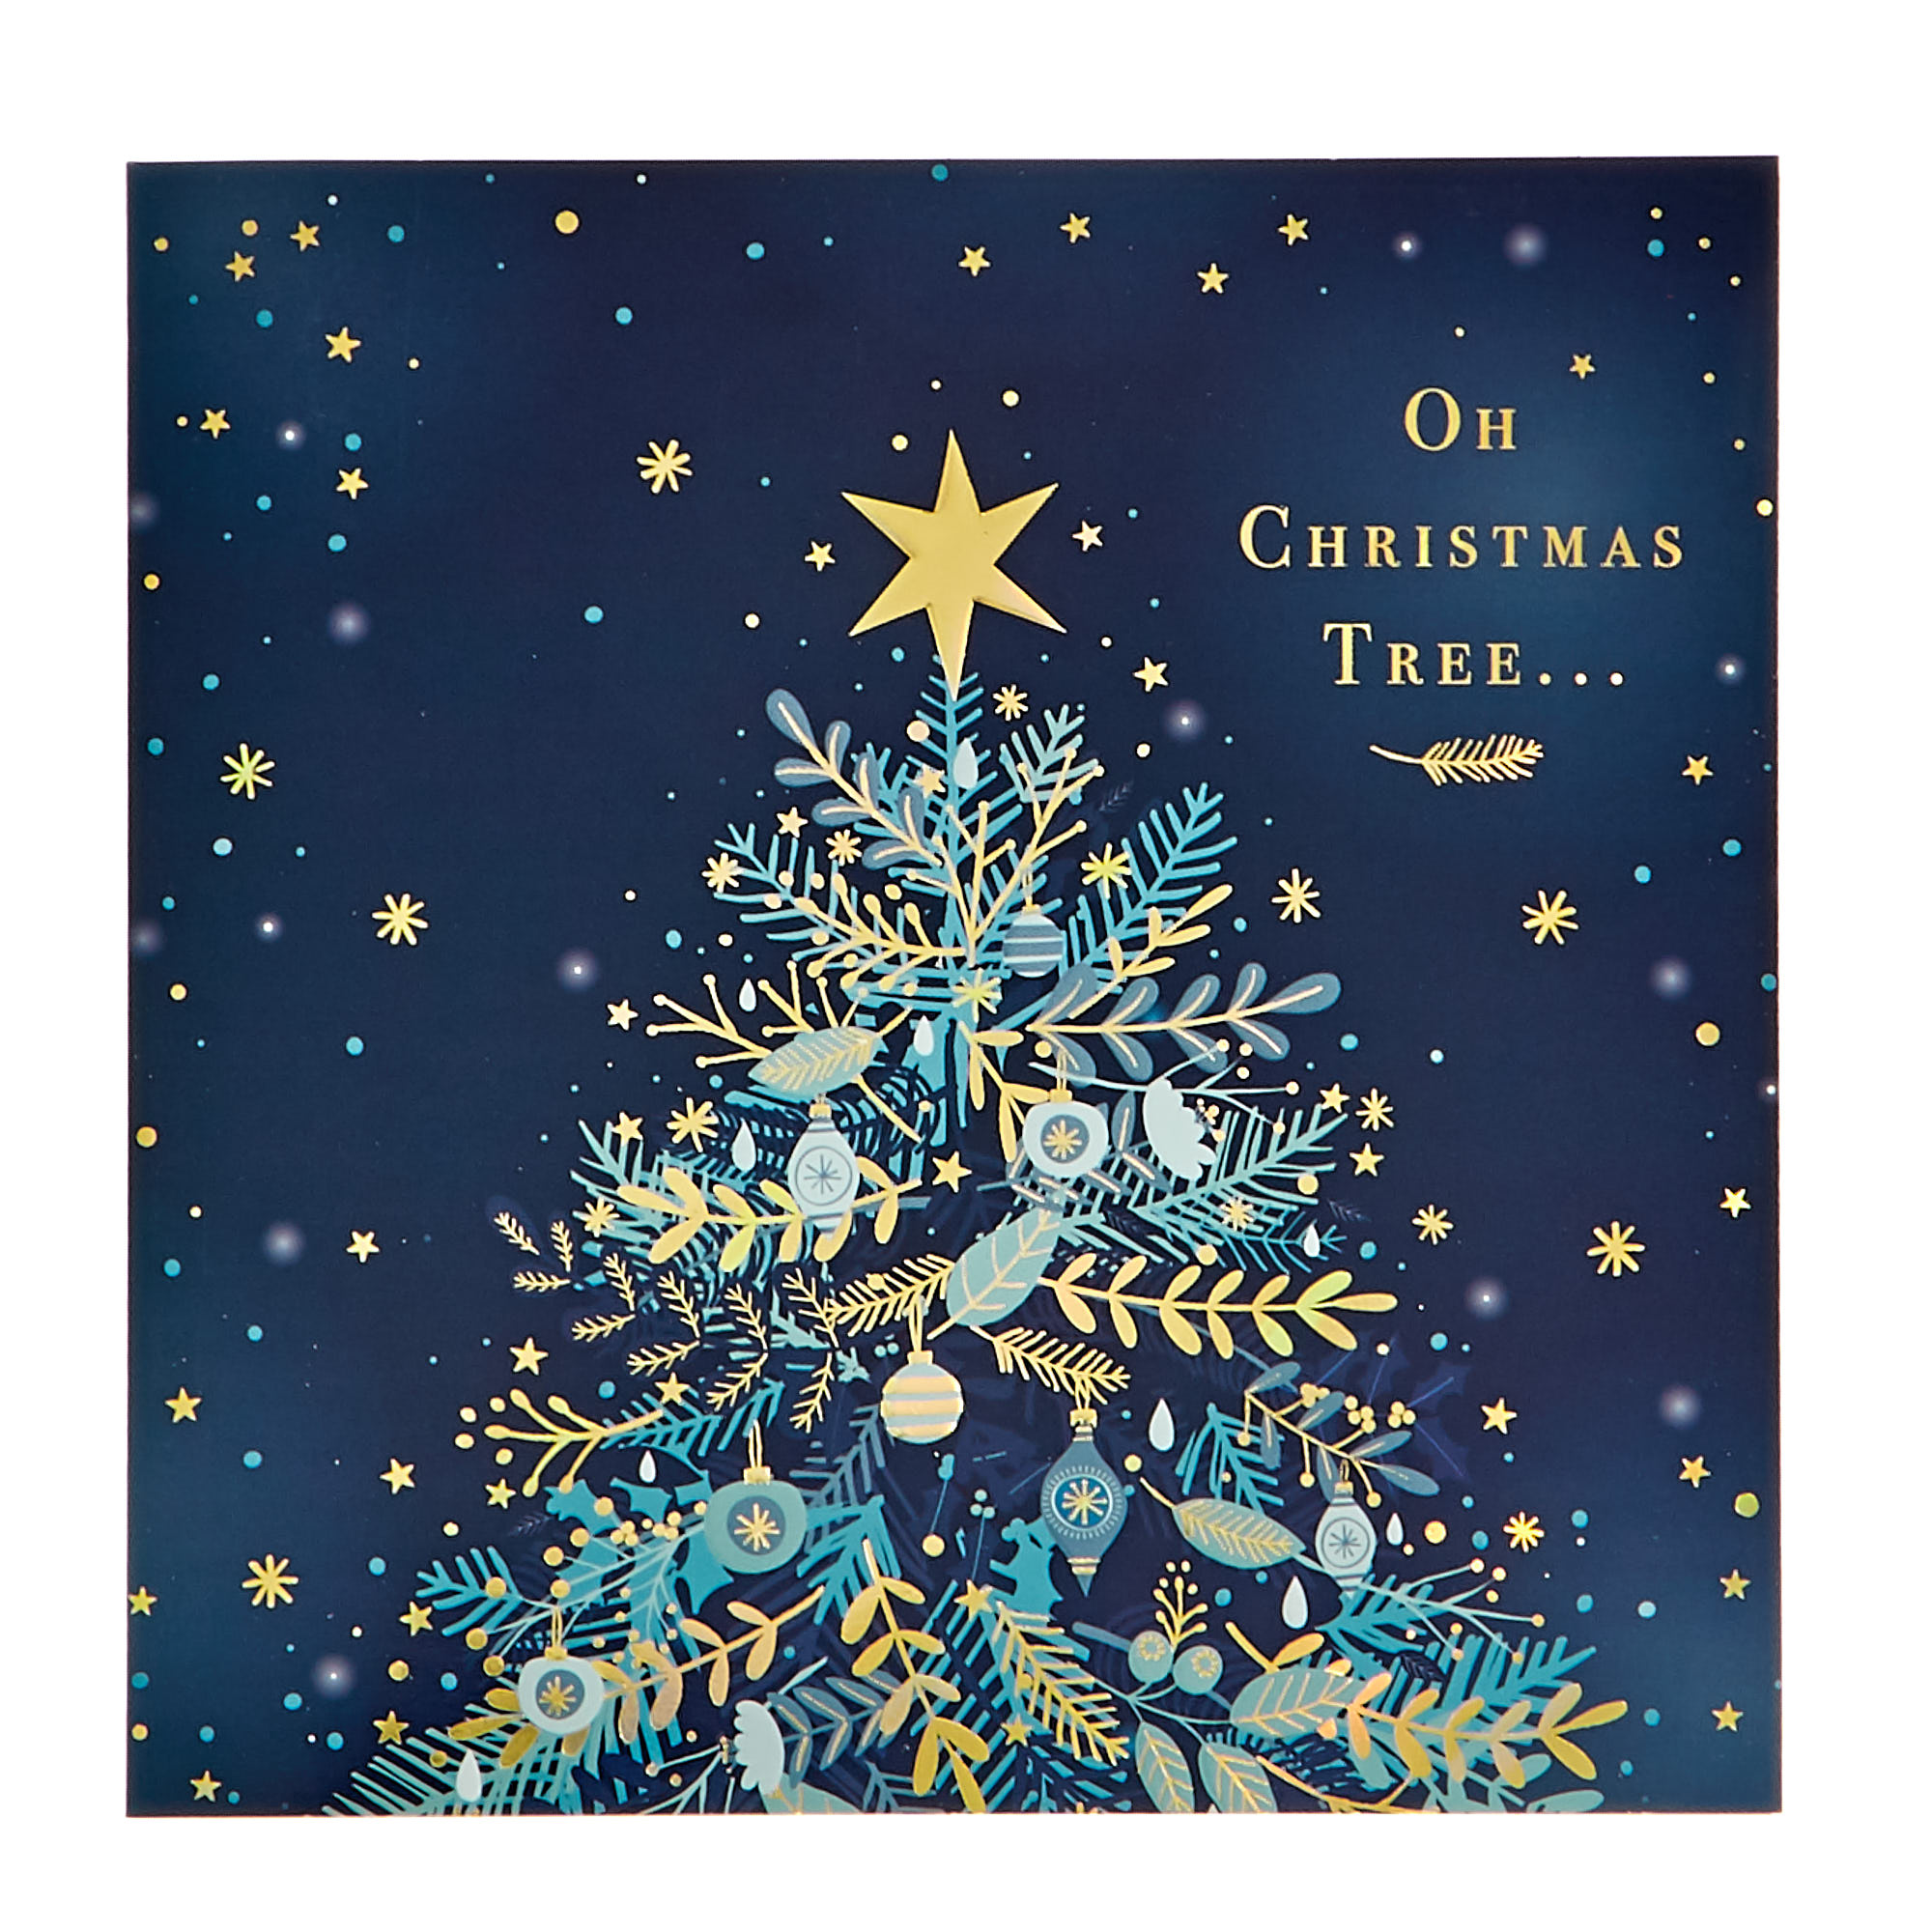 10 Deluxe Charity Boxed Christmas Cards - Navy & gold (2 Designs)